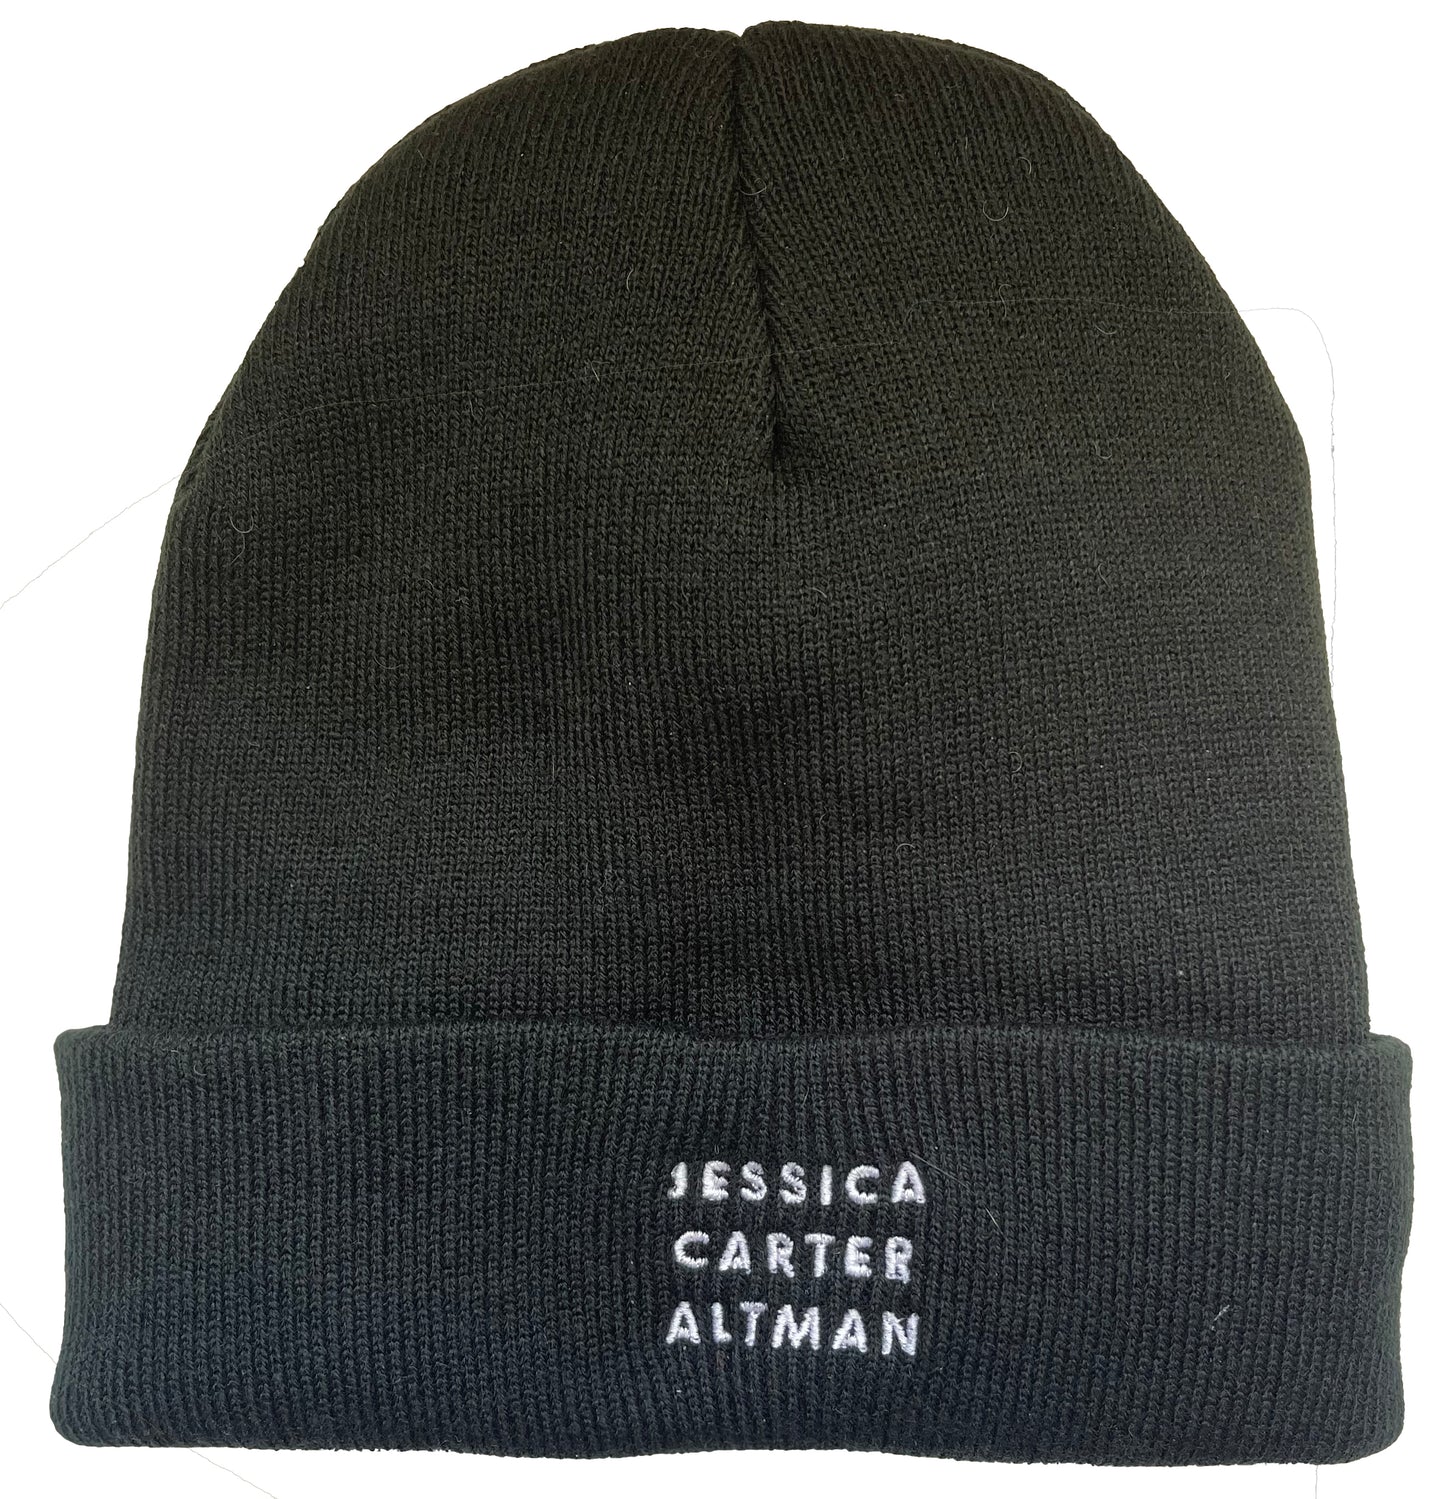 Jessica Carter Altman embroidered on fleece-lined knit cap